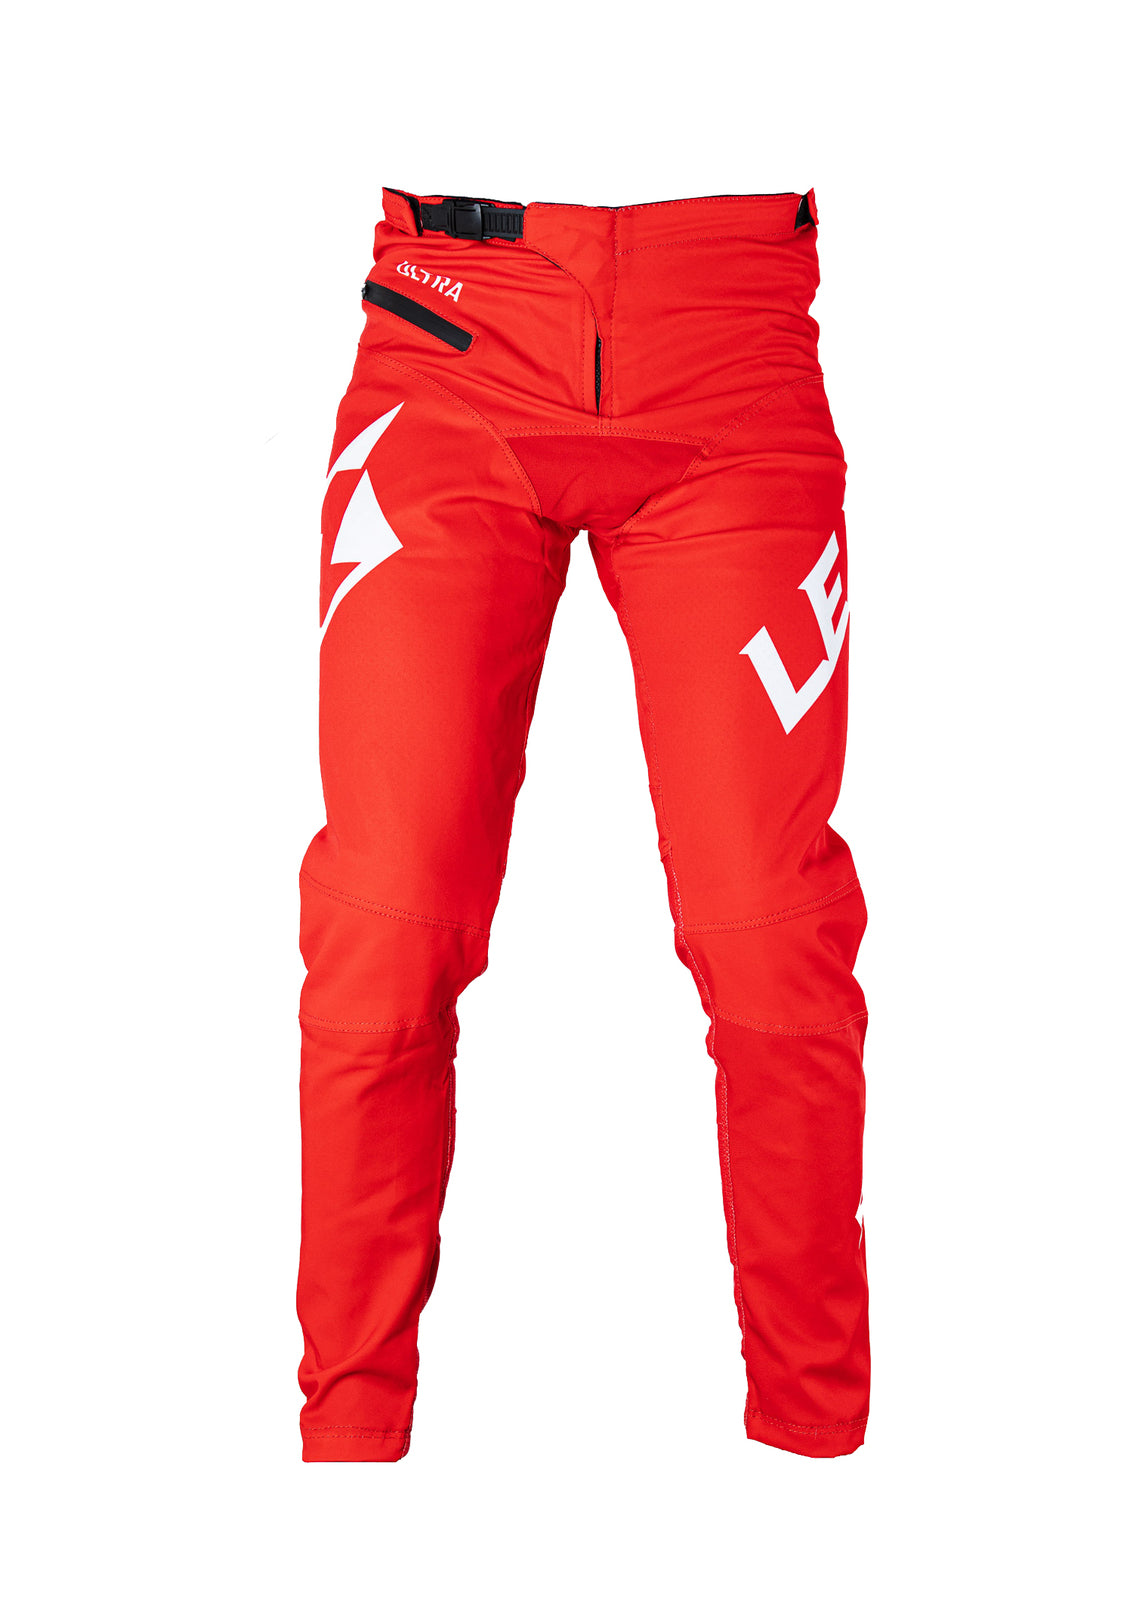 A pair of Lead Ultra Pants with a white logo on them.